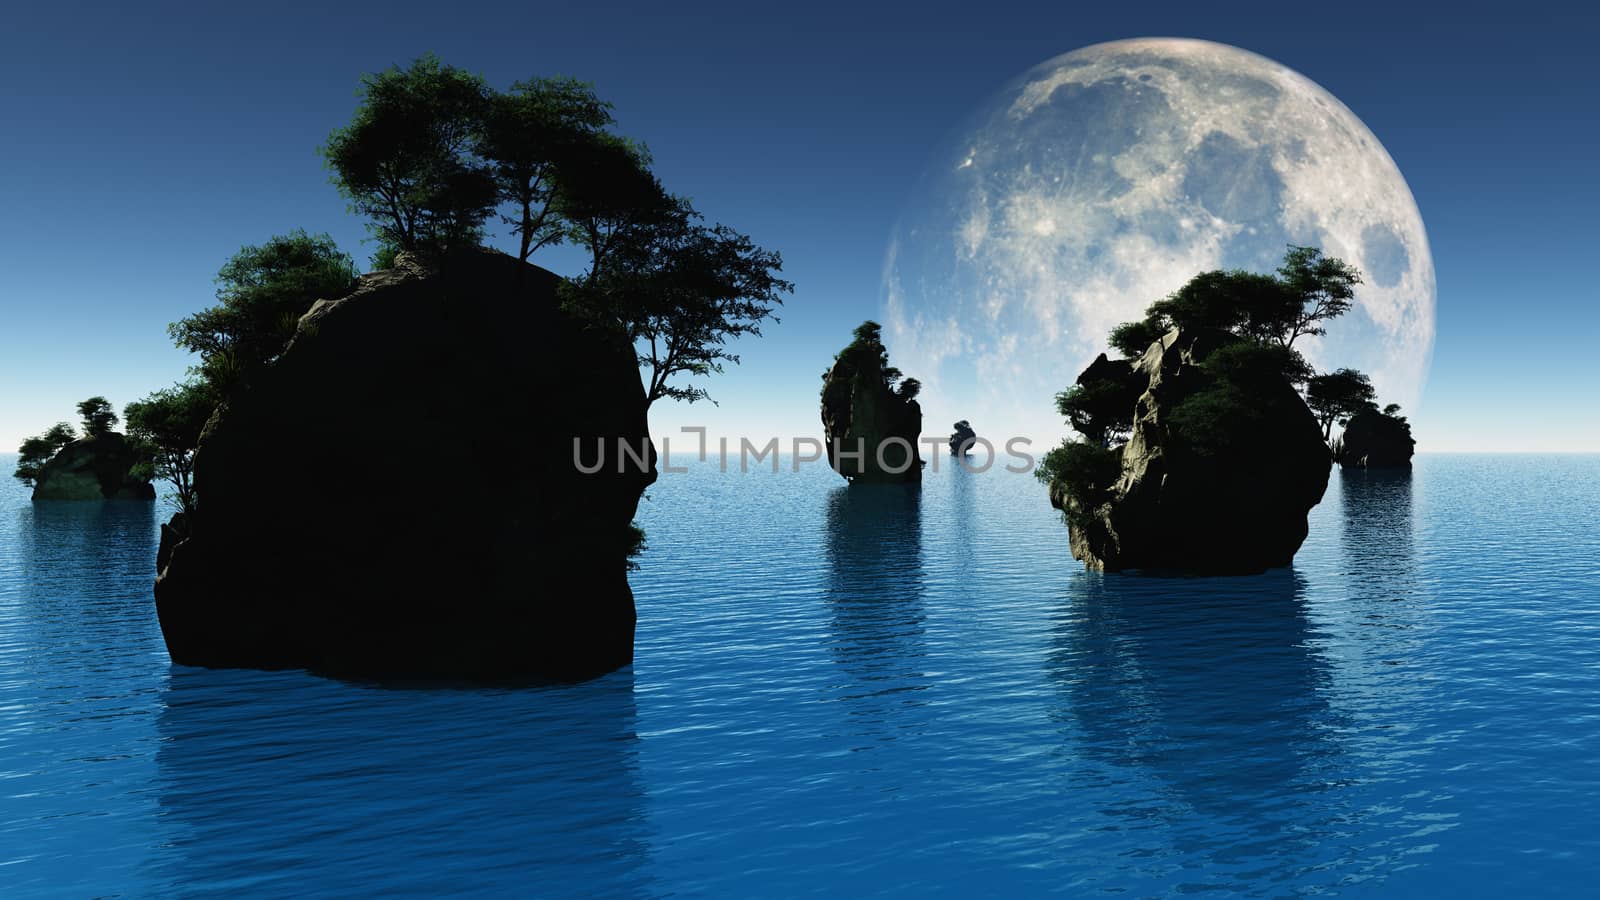 Small islands with green trees. Big moon rising. 3D rendering